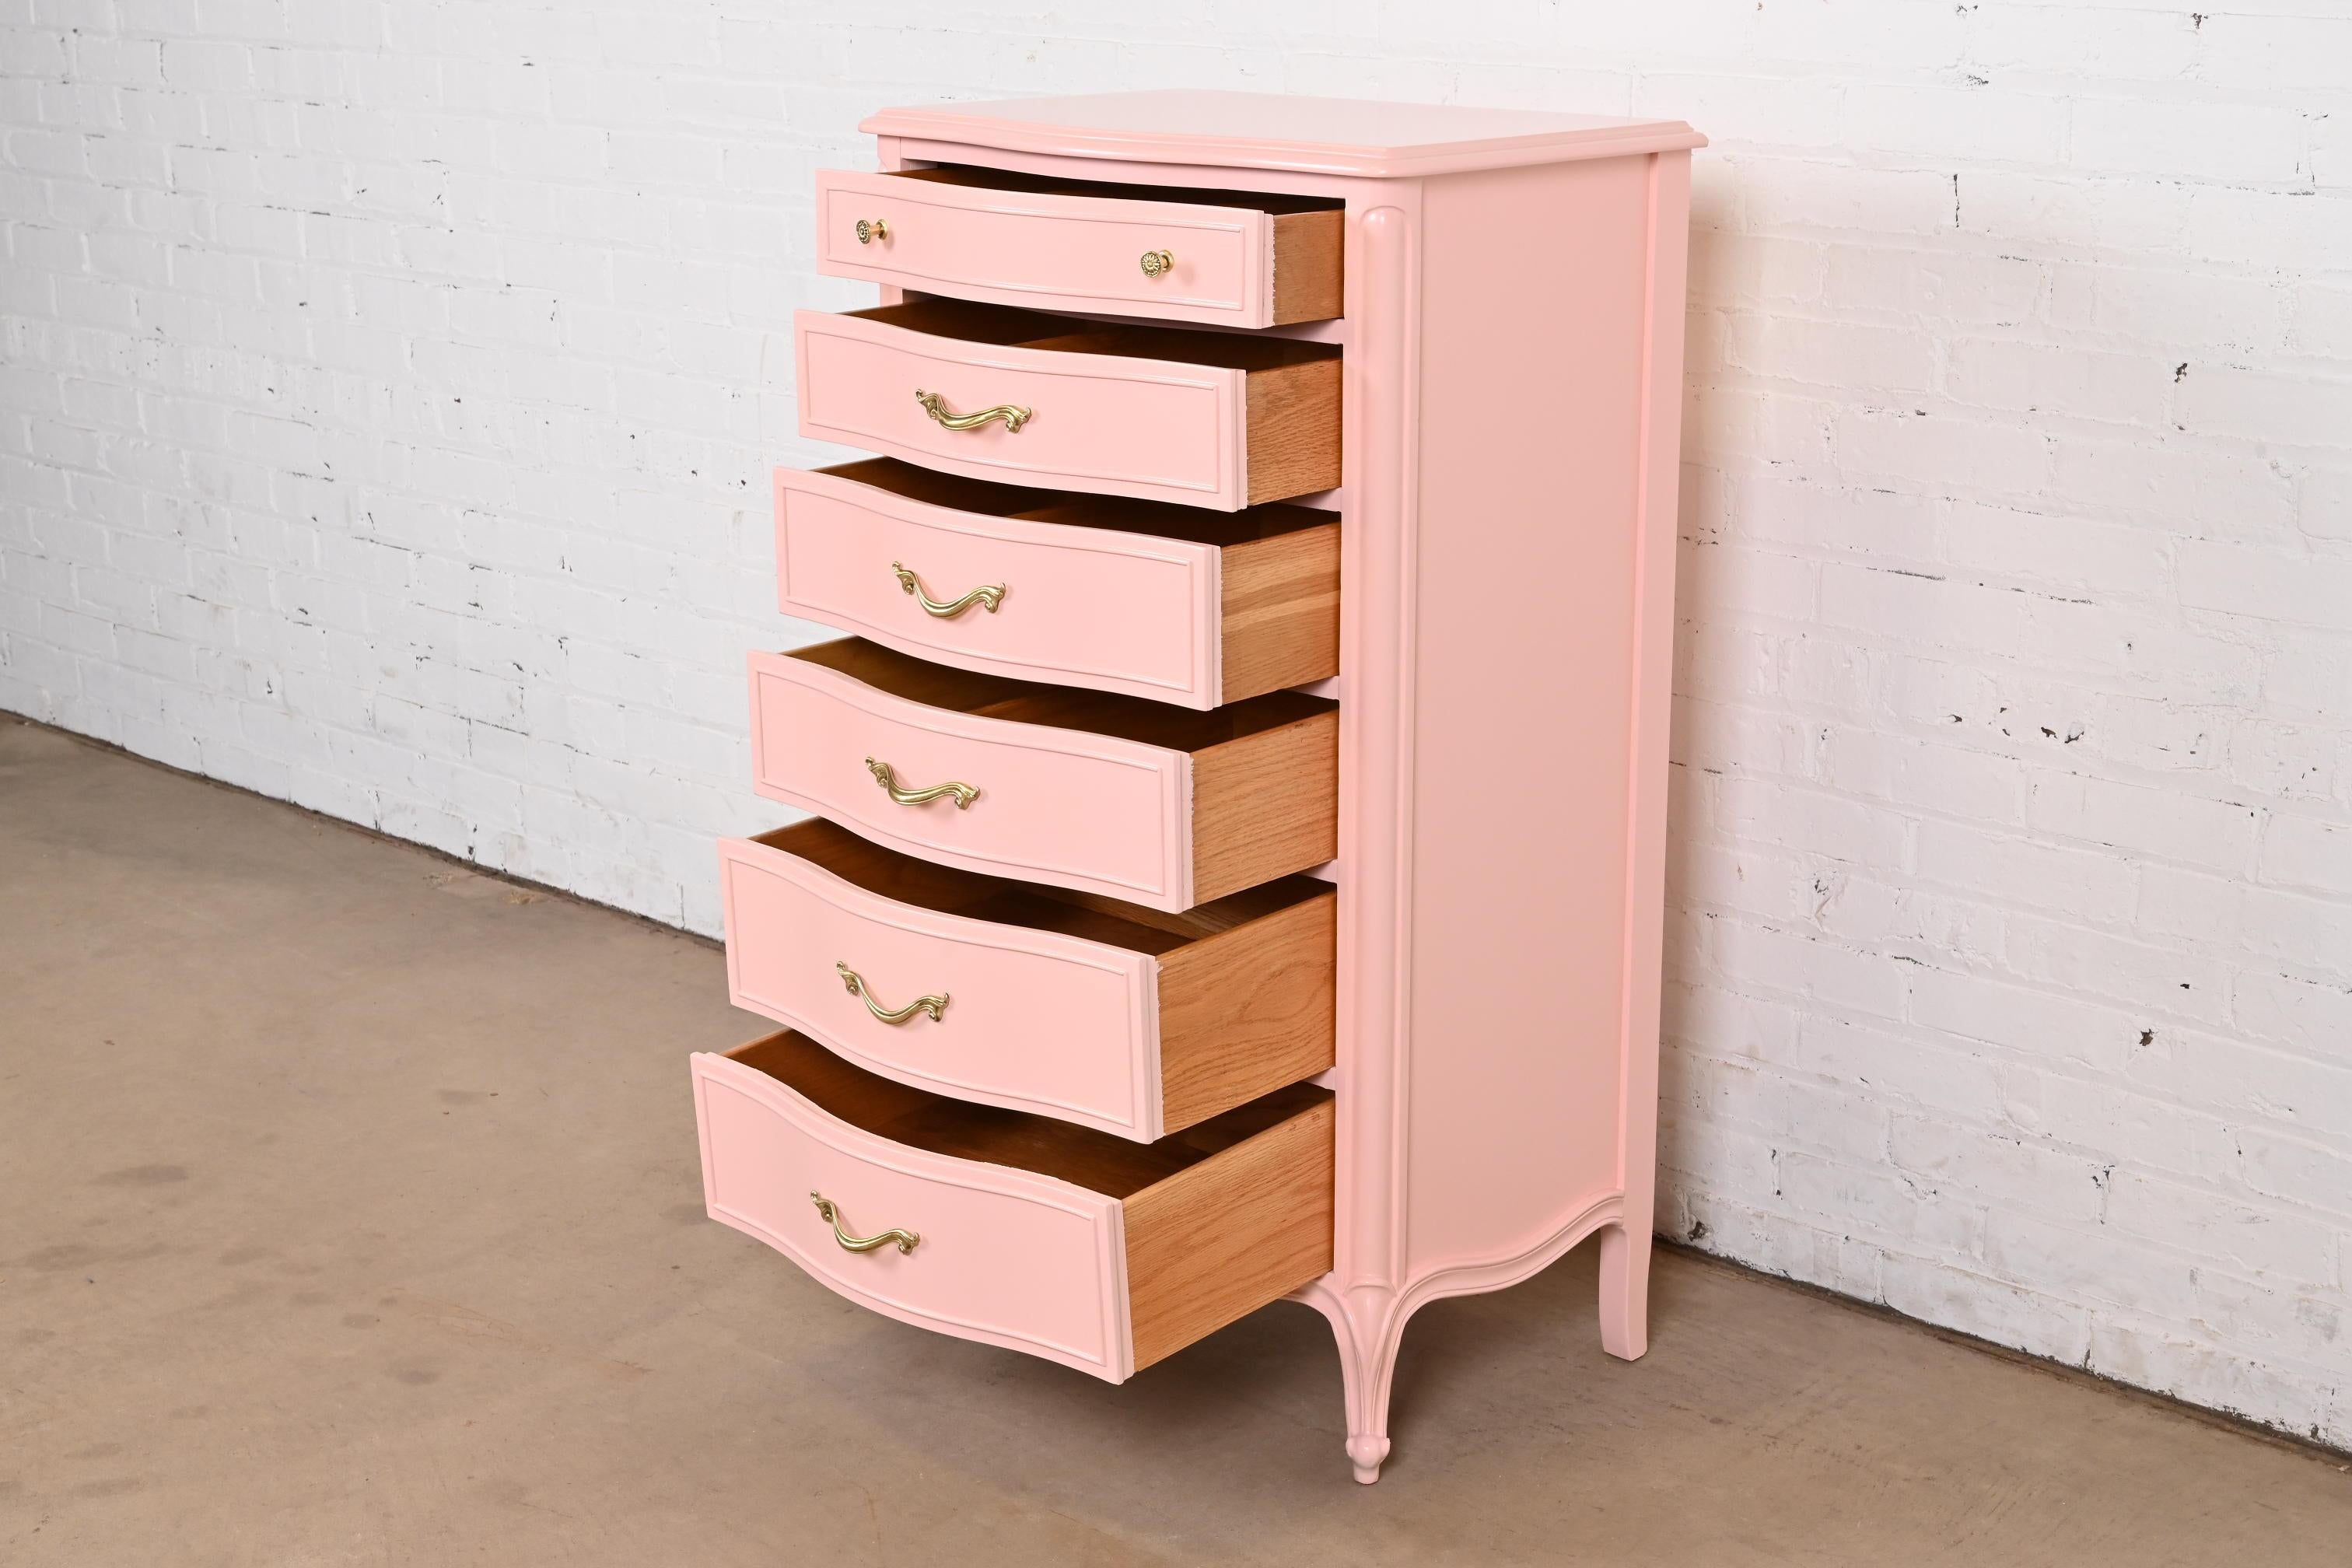 Drexel French Provincial Louis XV Pink Lacquered Lingerie Chest or Semainier For Sale 3